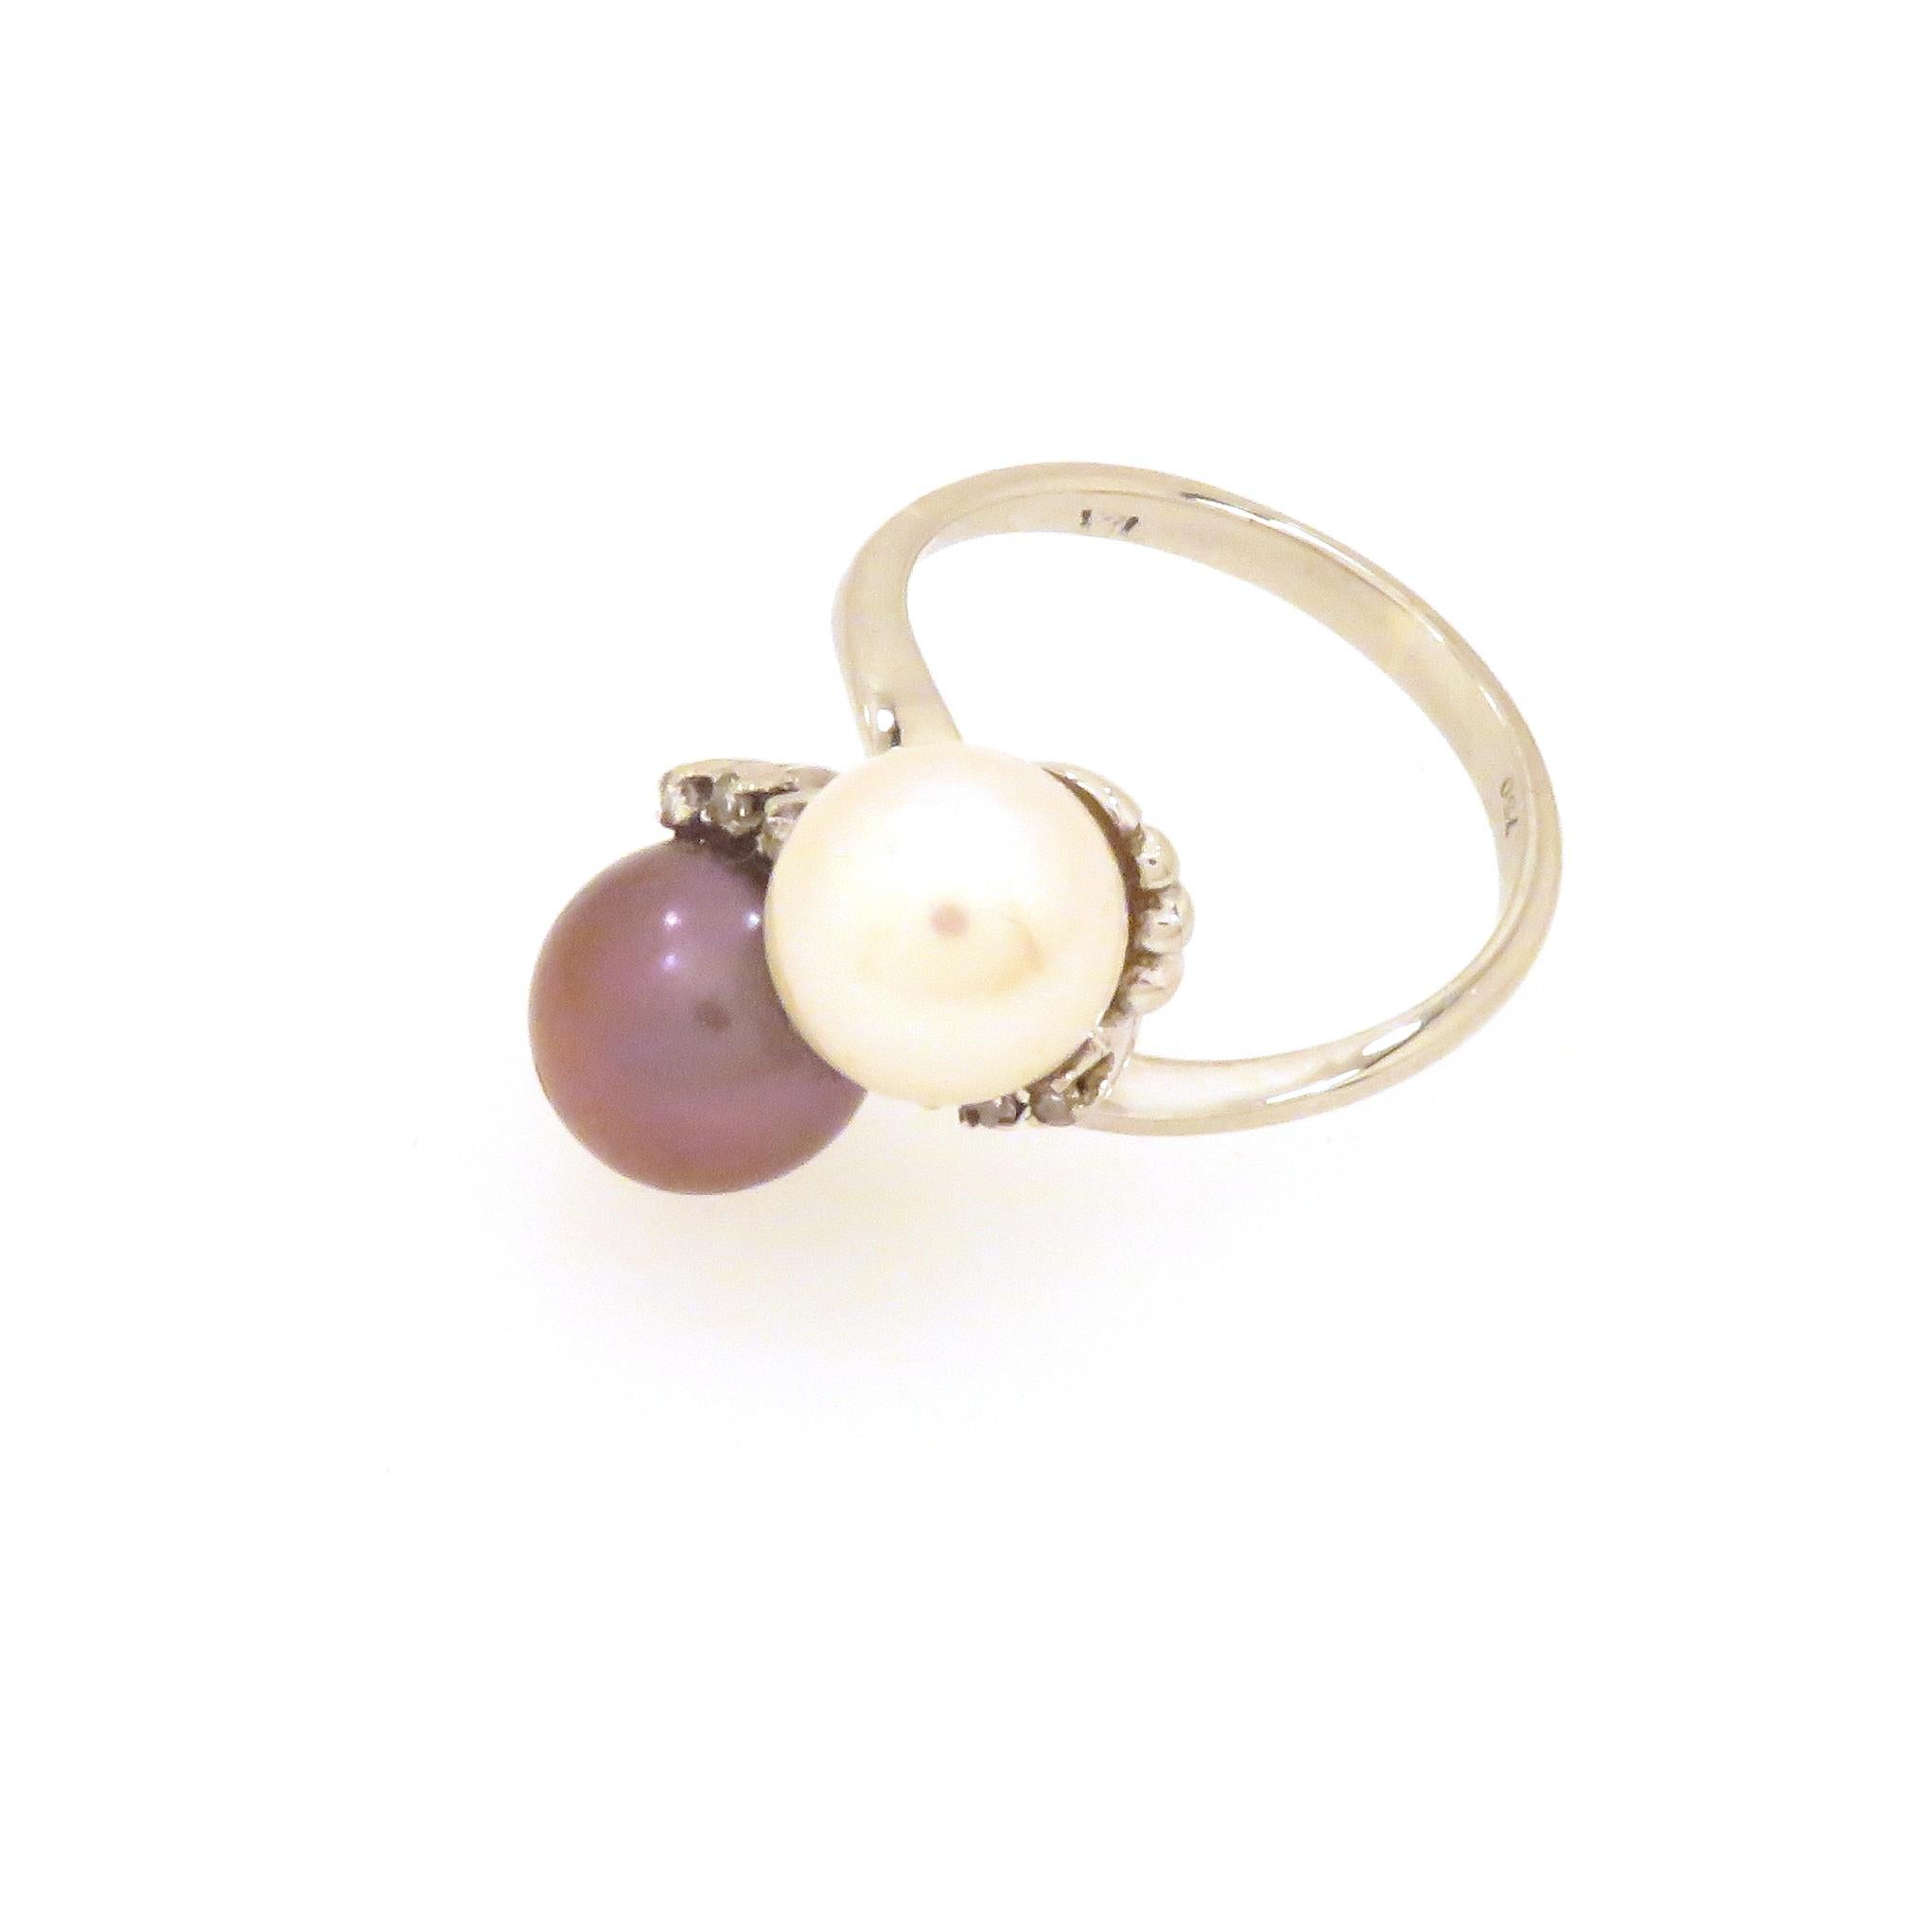 Brilliant Cut Diamonds Pearls 18 Karat White Gold Vintage Ring Handcrafted in Italy For Sale